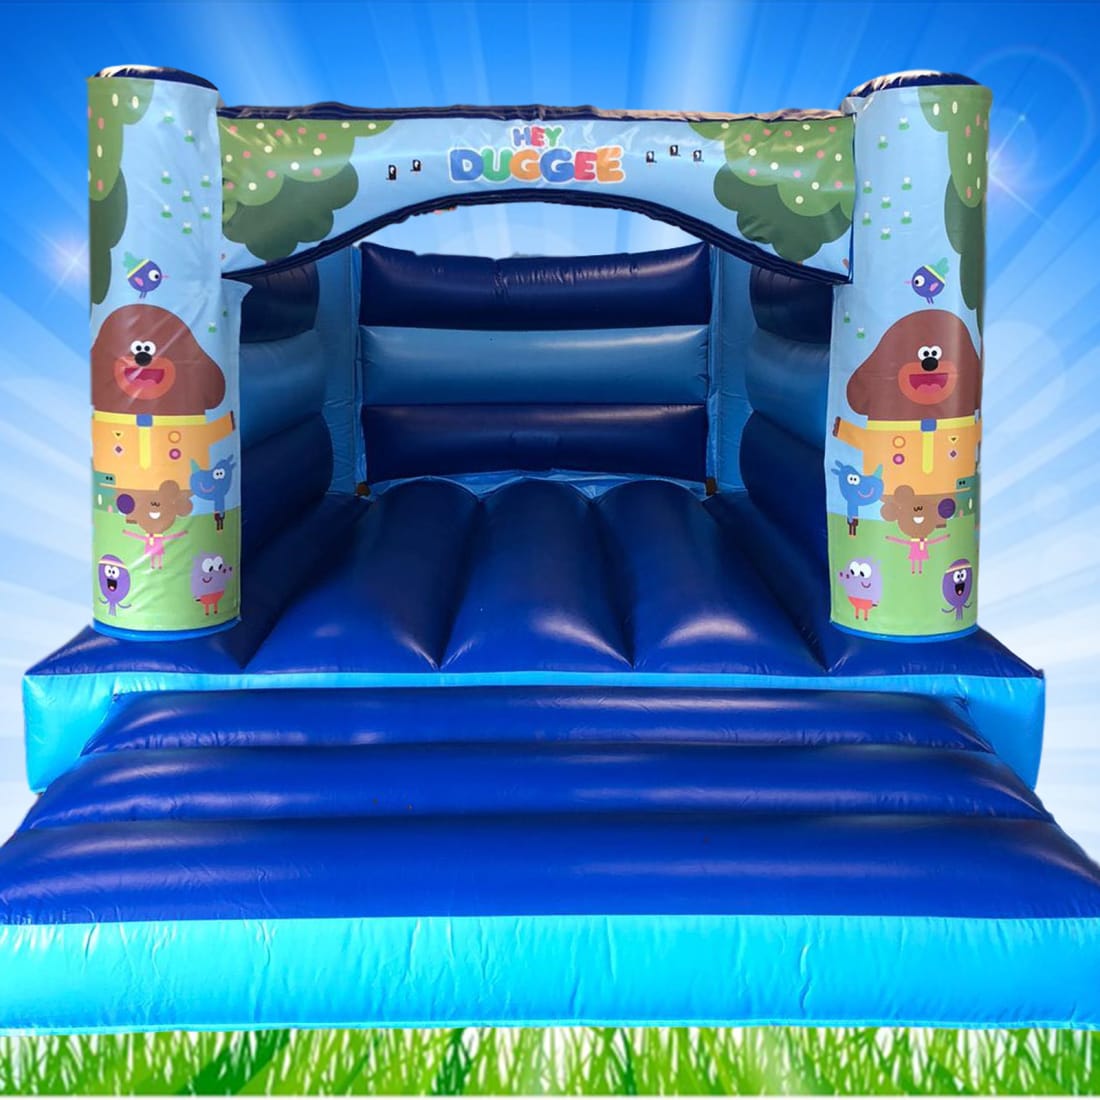 Low Height Bouncy Castles Bouncy Castle And Soft Play Hire In Hayes Northolt Hillingdon Uxbridge Greenford Feltham Hounslow Ruislip